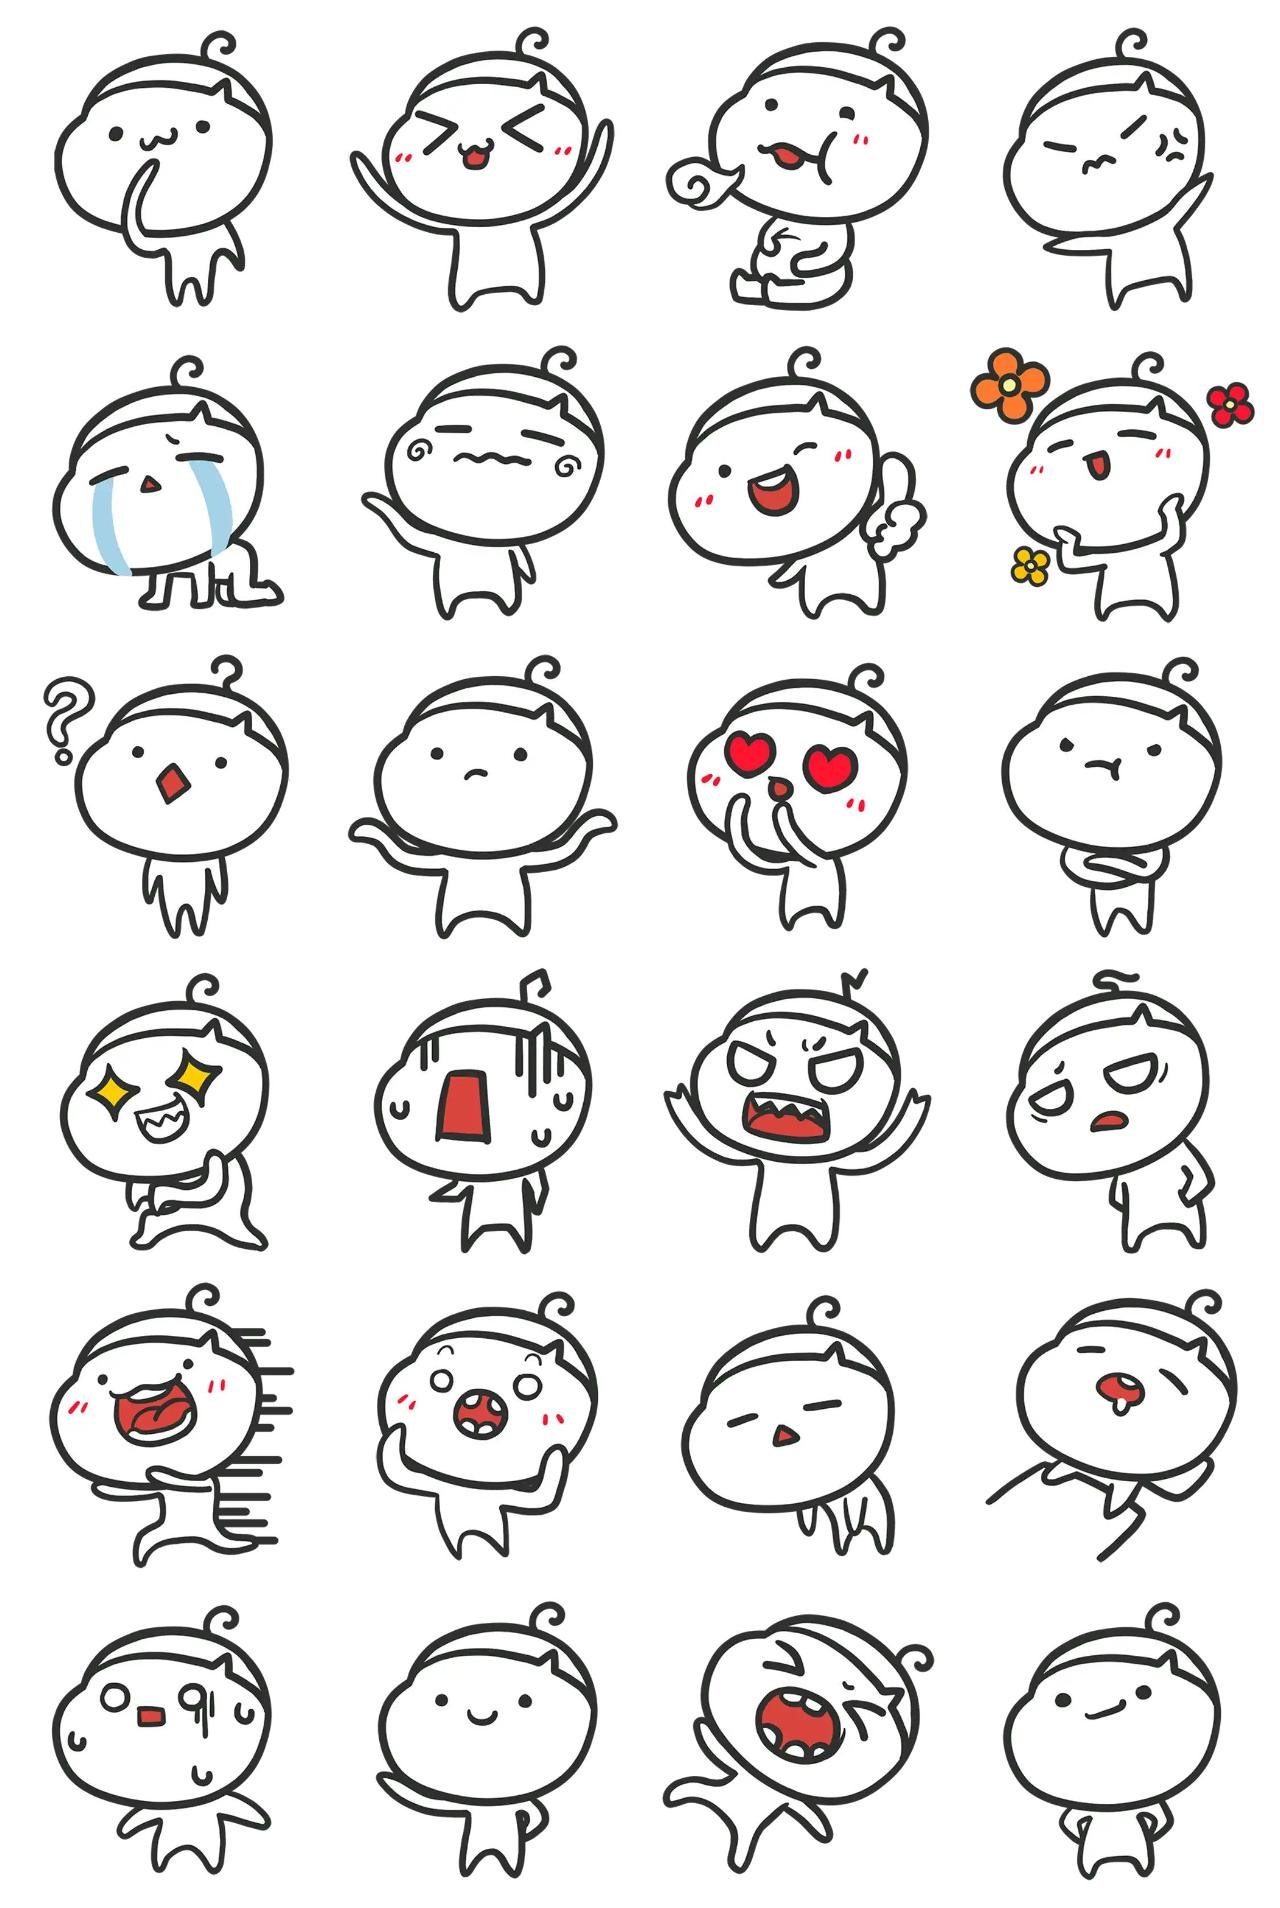 My cute little son Gag,People sticker pack for Whatsapp, Telegram, Signal, and others chatting and message apps